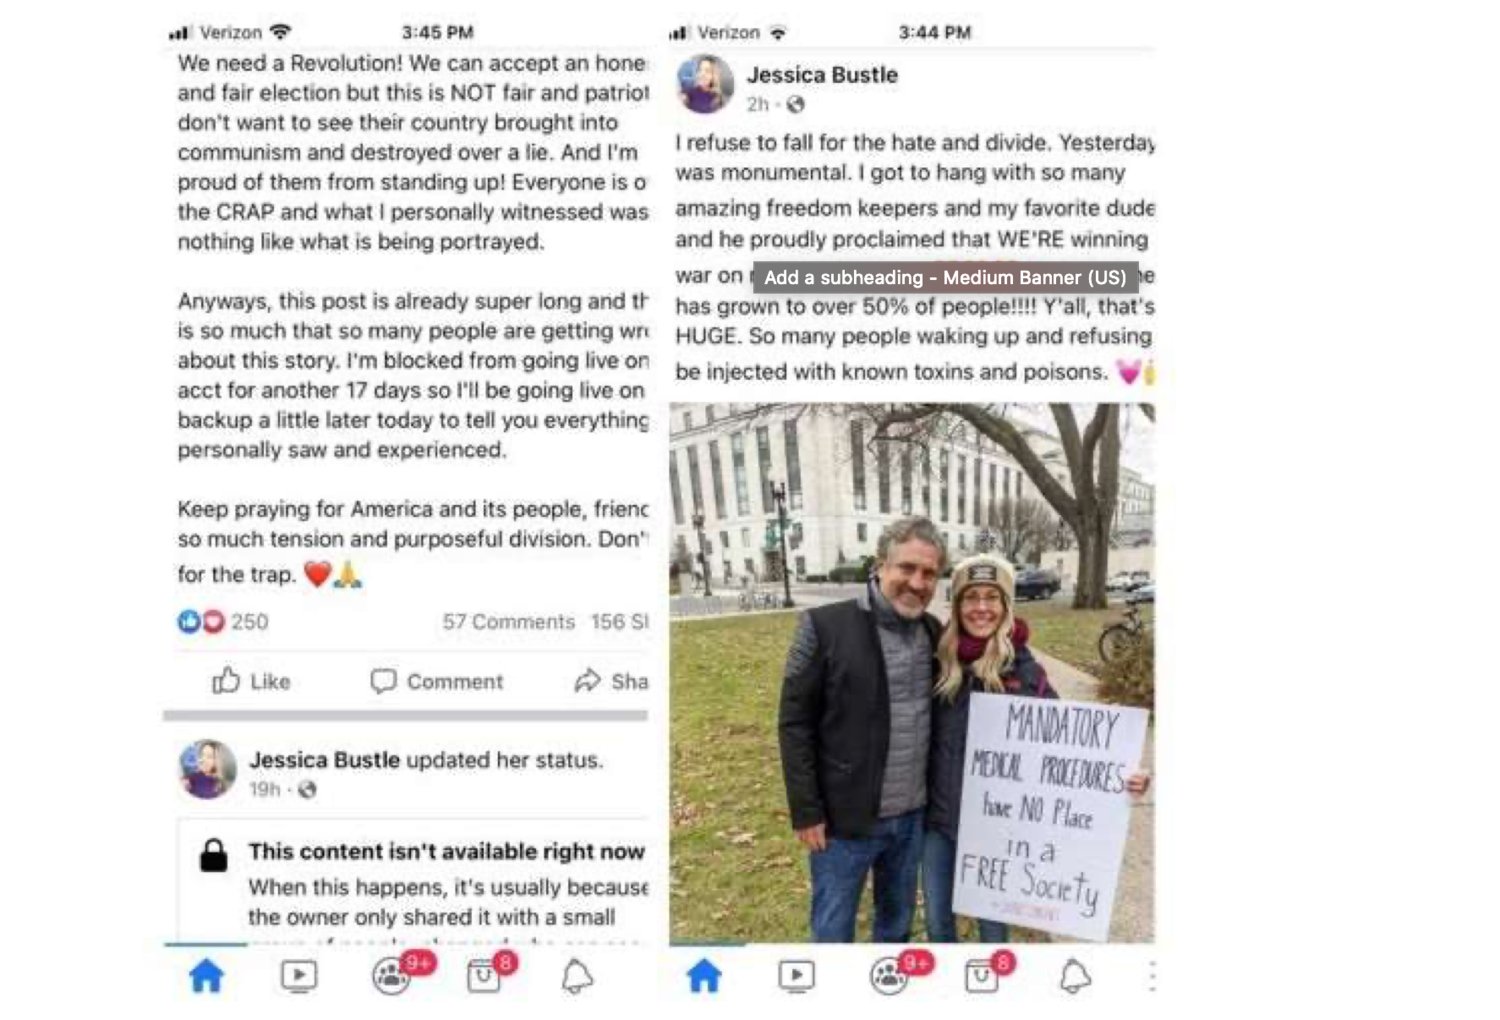 Jessica Bustle posts smiling photo of the couple at the Jan. 6 Trump rally.